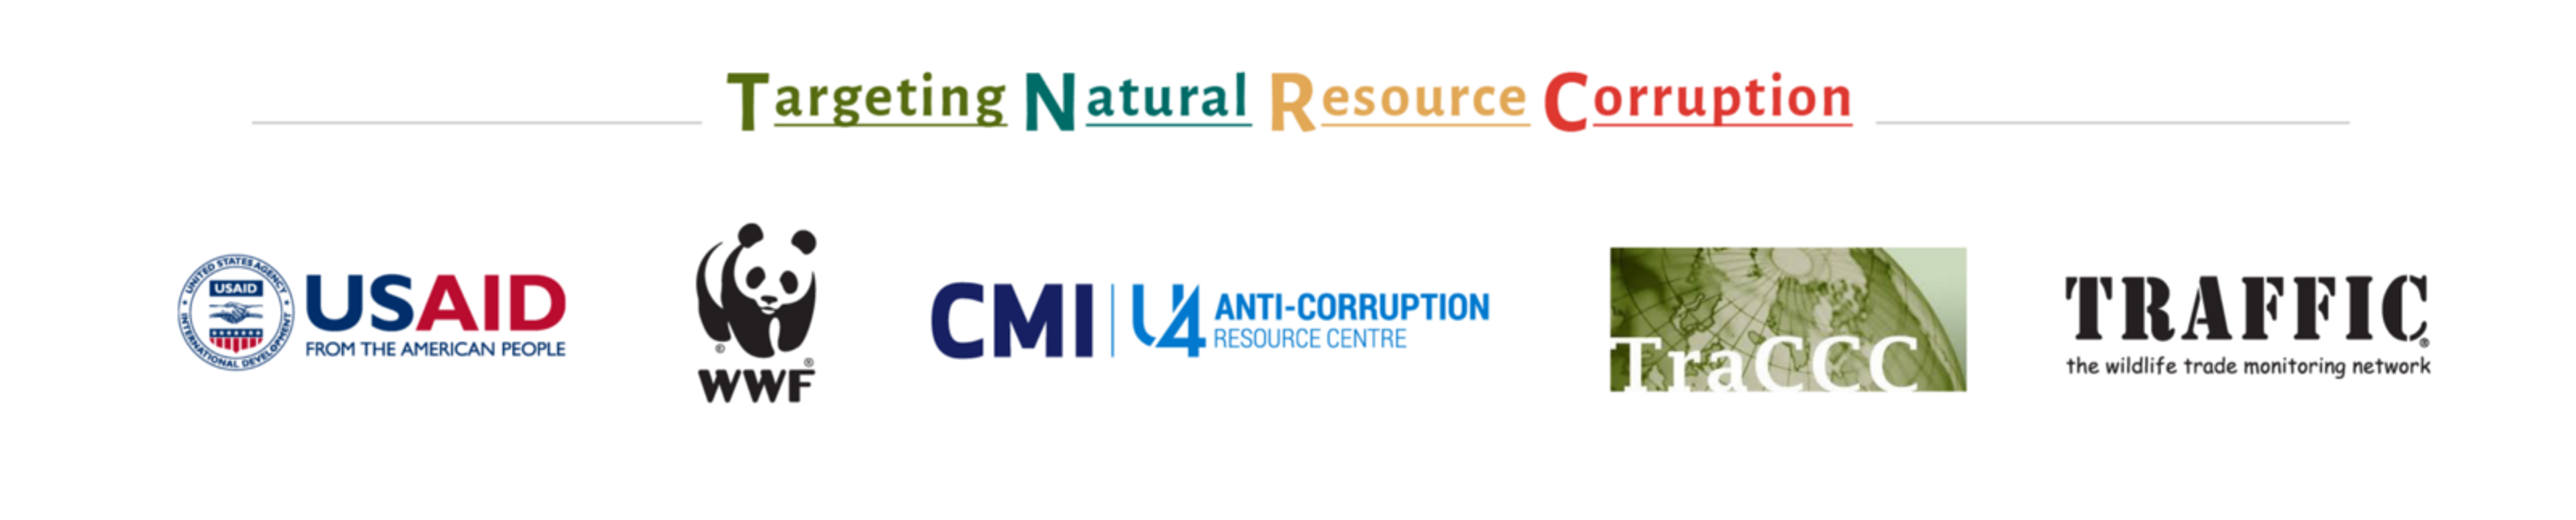 Logos of partner institutions in the TNRC consortium, or Targeting Natural Resource Corruption: USAID, the WWF, CMI U4 Anti-corruption Resource Centre, TRACCC, and TRAFFIC